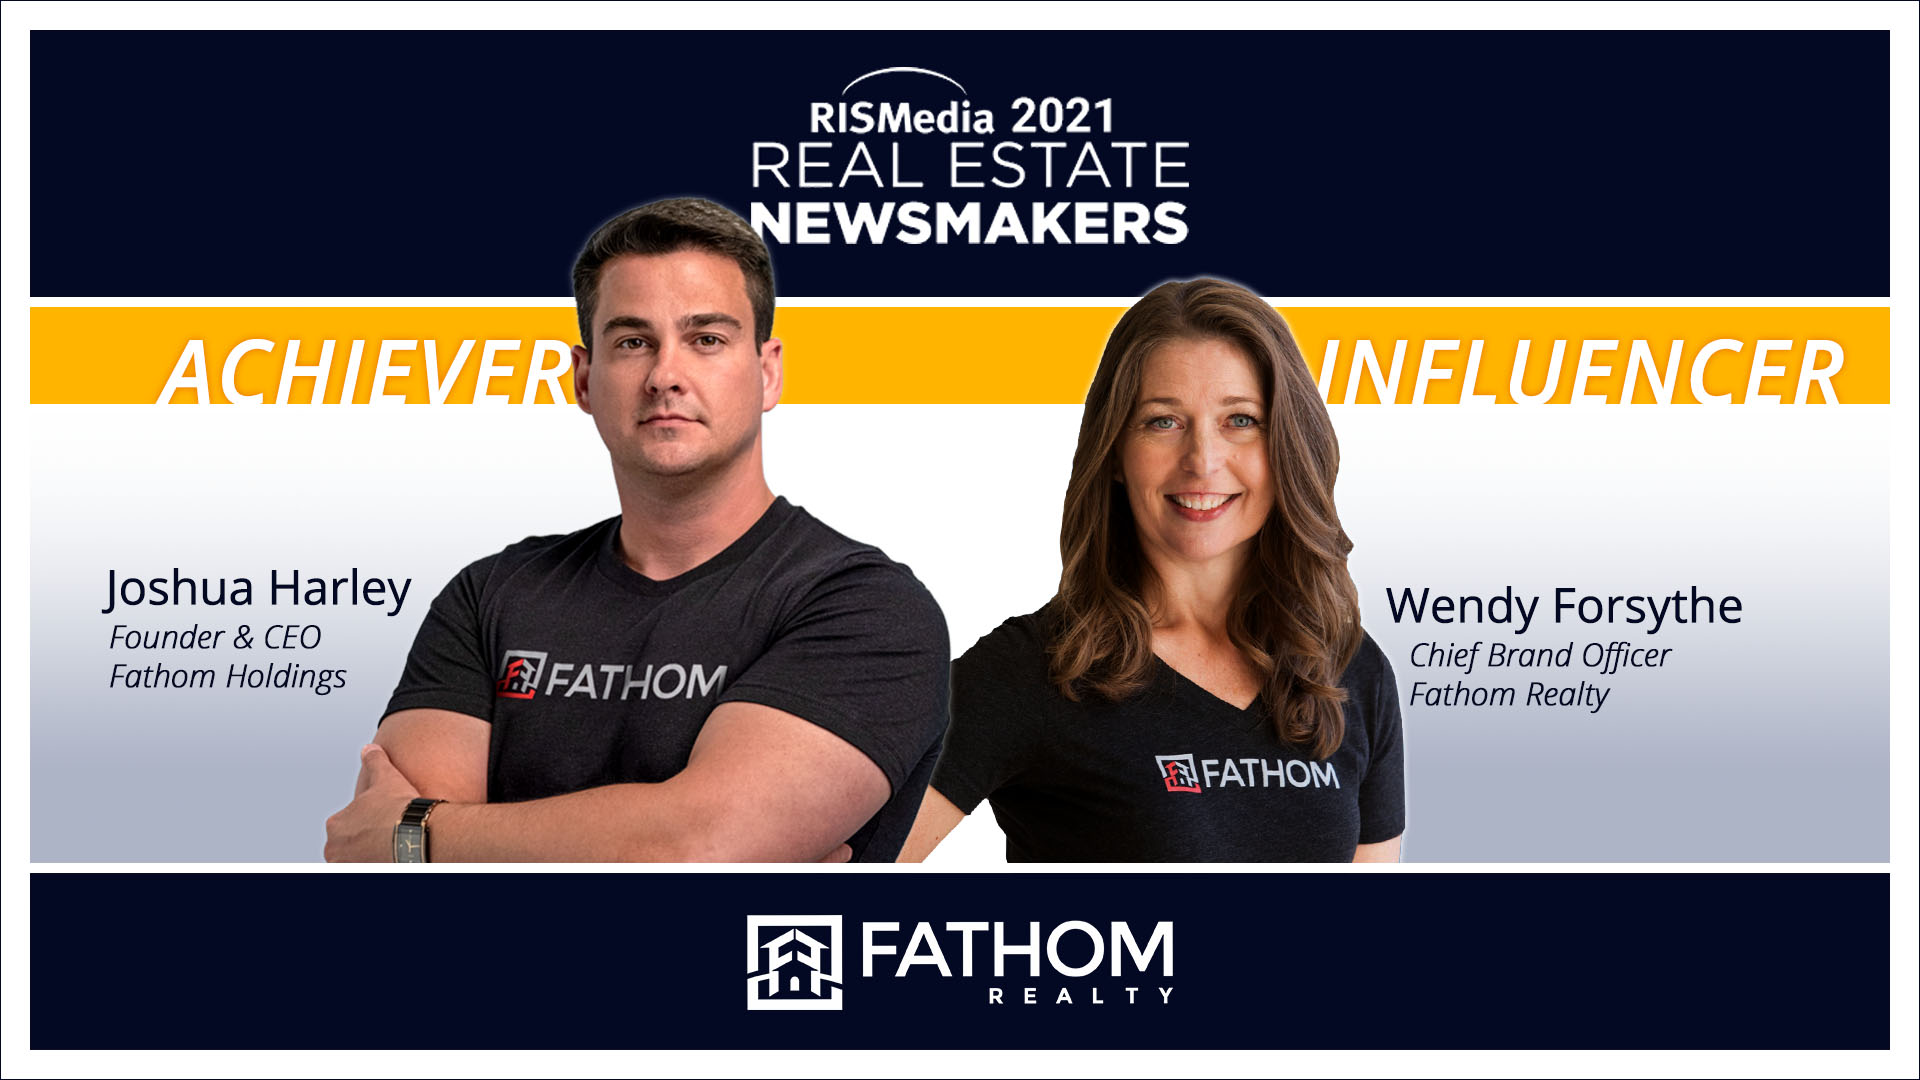 Featured image for “Josh Harley and Wendy Forsythe Named RISMedia 2021 Real Estate Newsmakers”